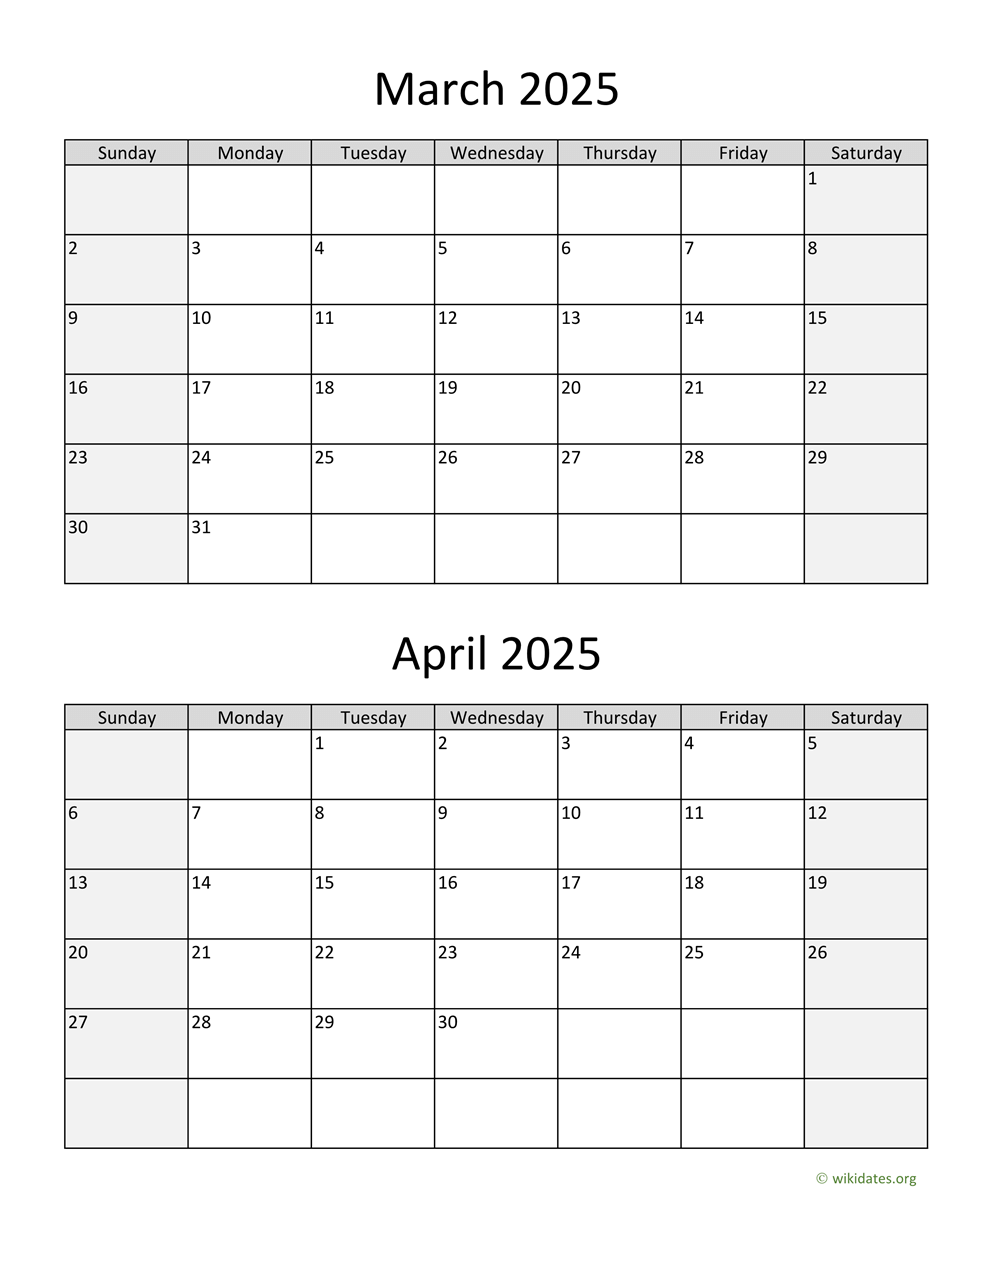 march-and-april-2025-calendar-wikidates